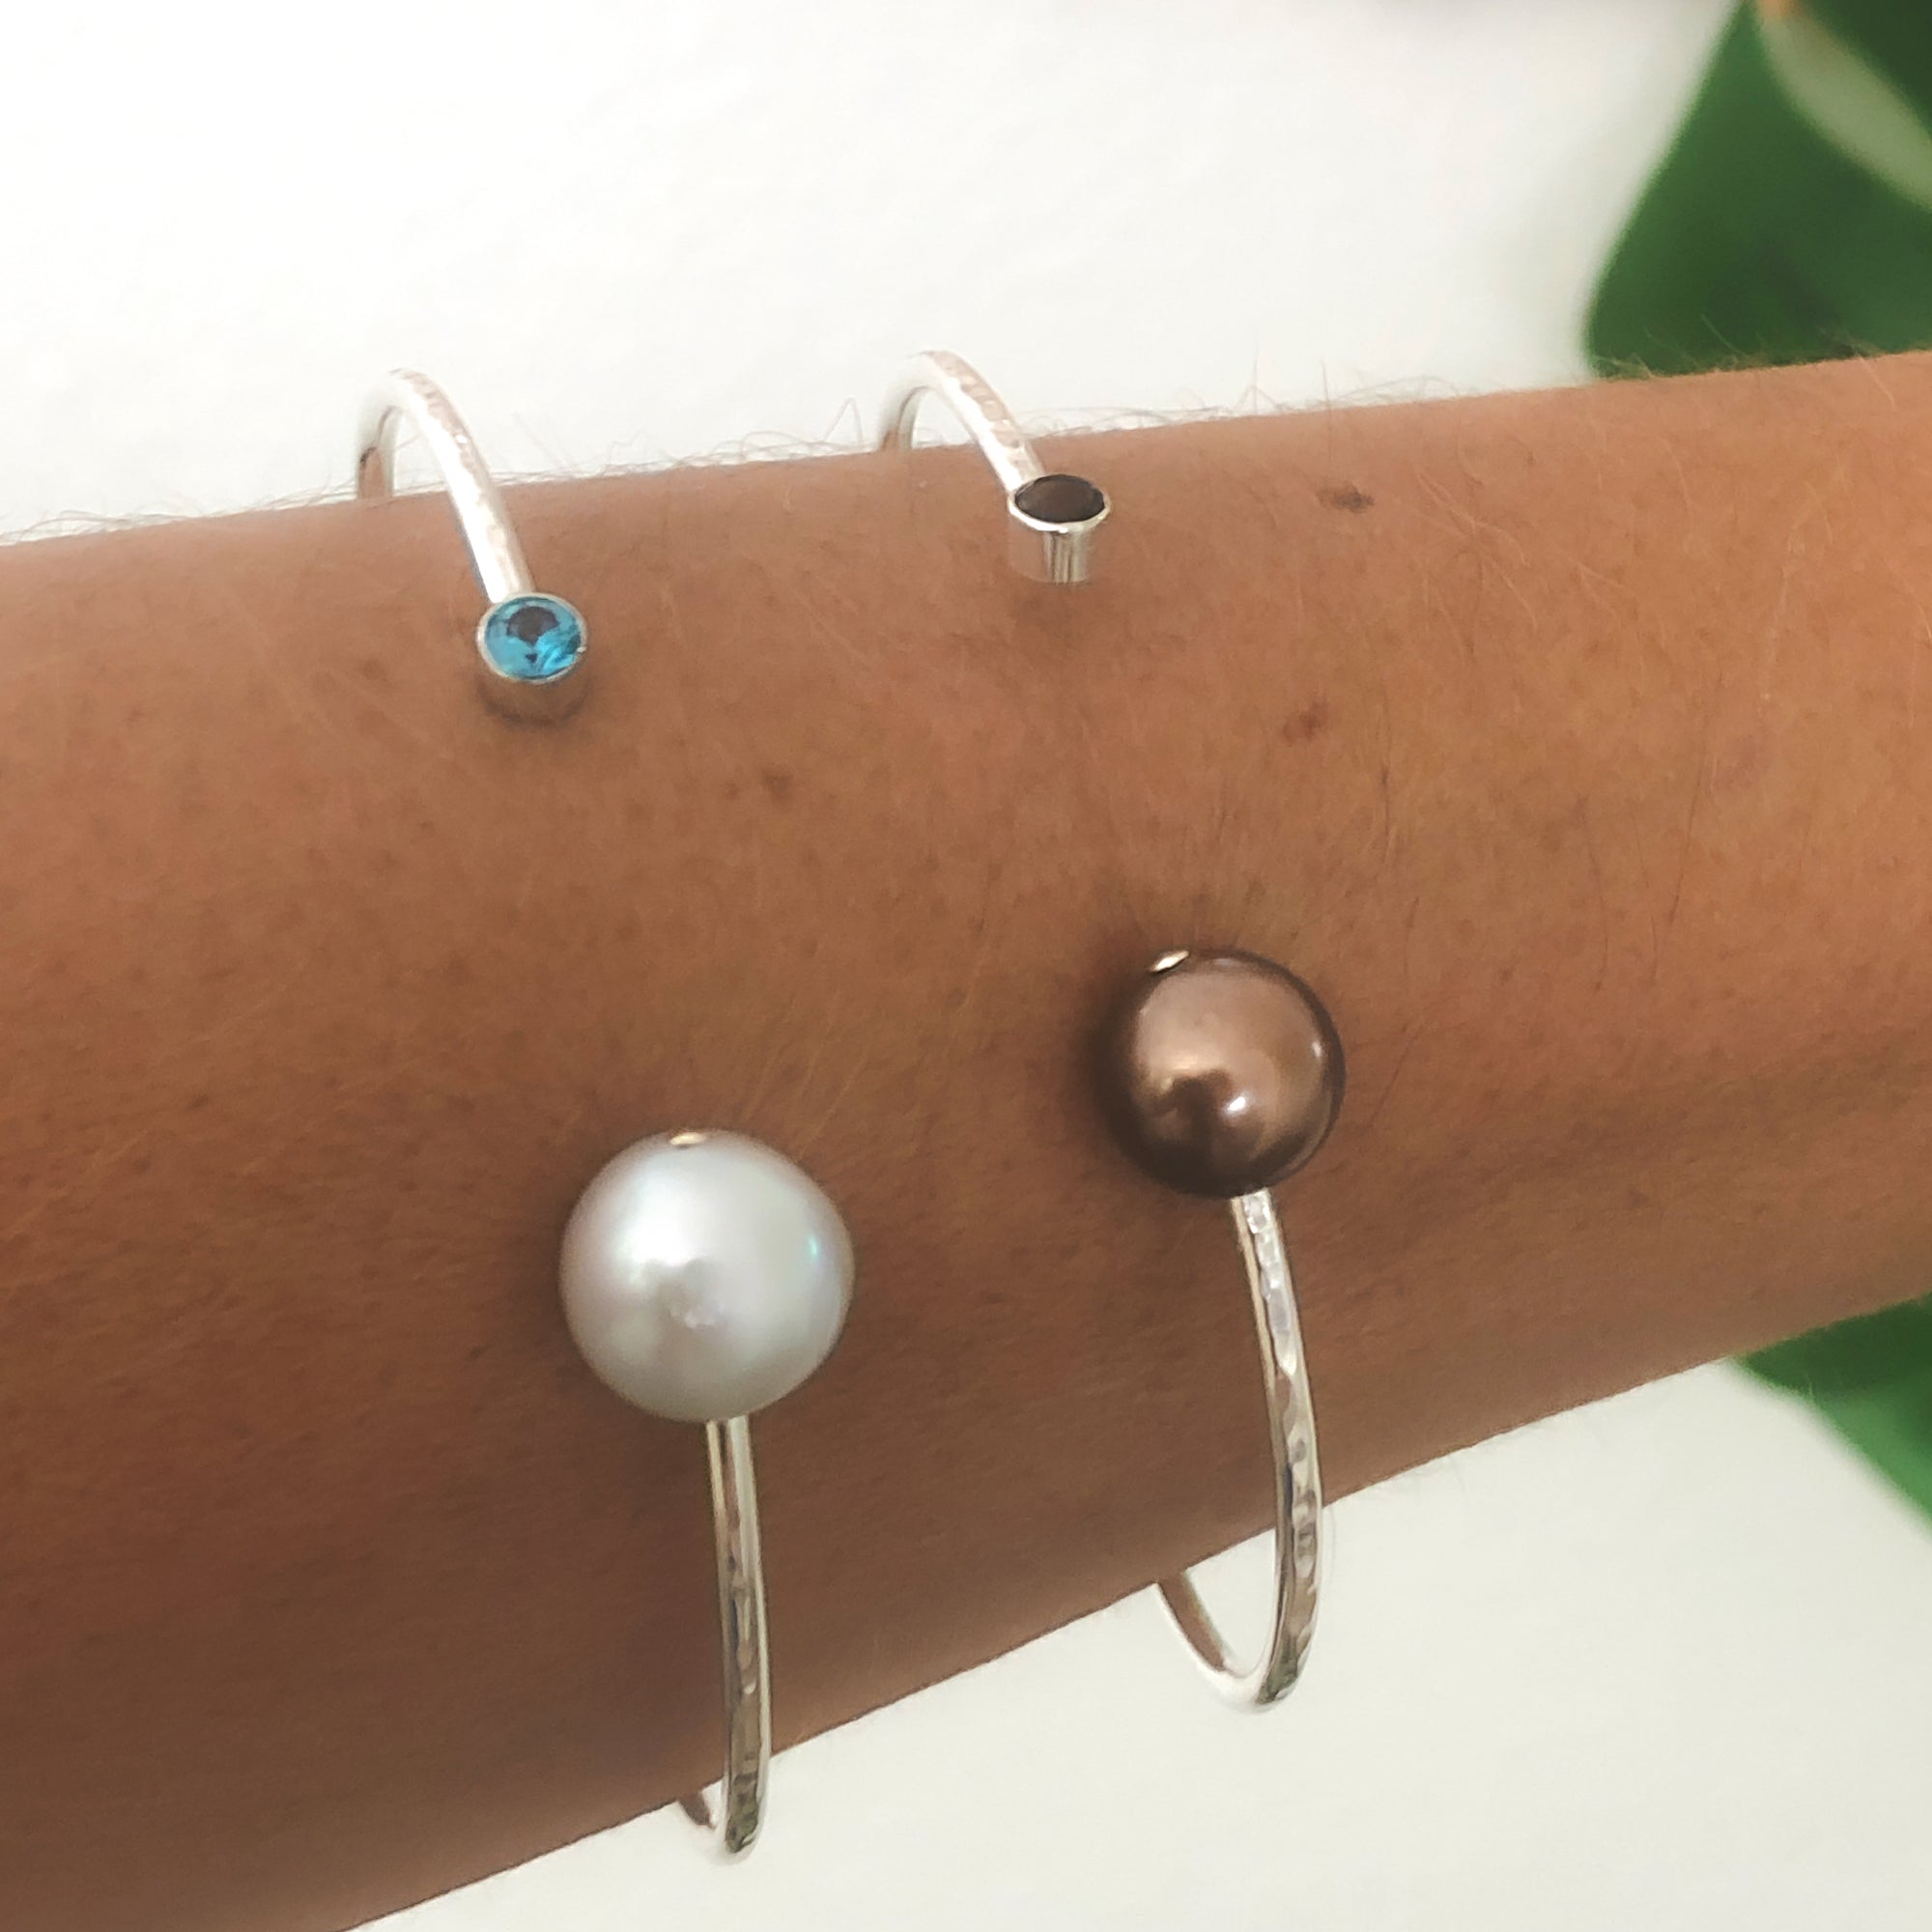 Sparkly Cuff Bangles With Gemstones and Pearls 